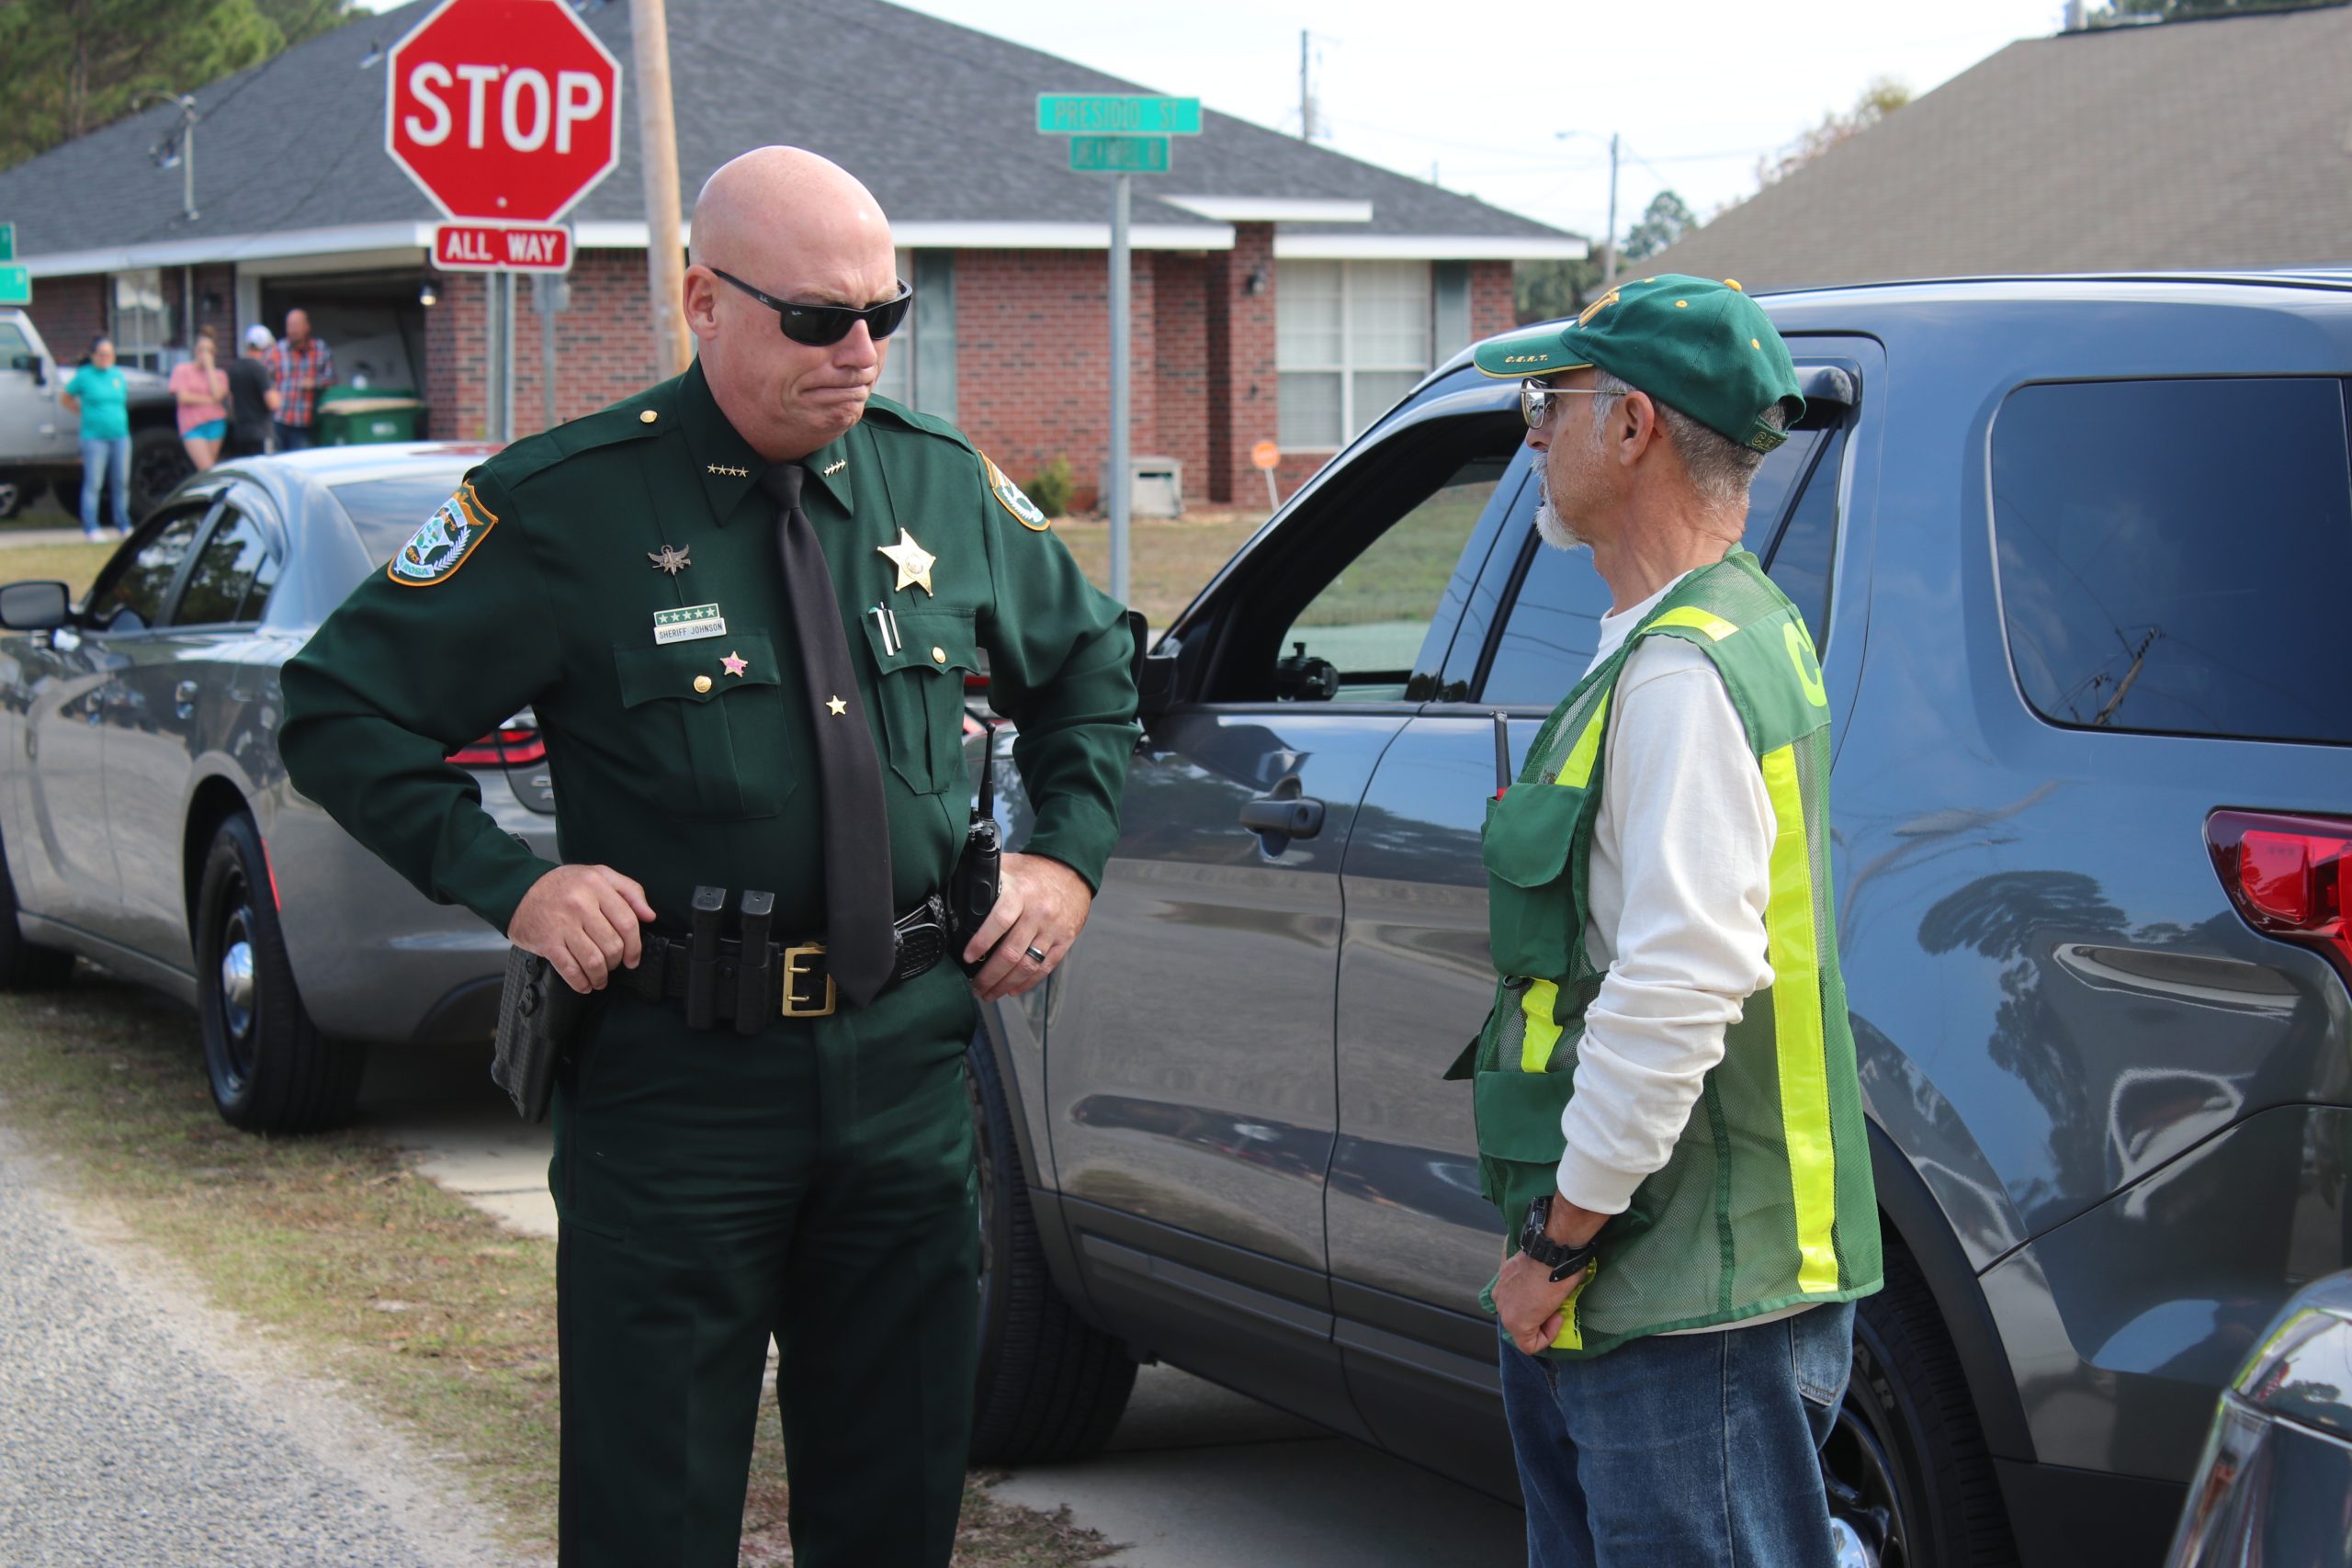 A sheriff talking to a man in a green vest next to a car, with a stop sign and other cars in the background.